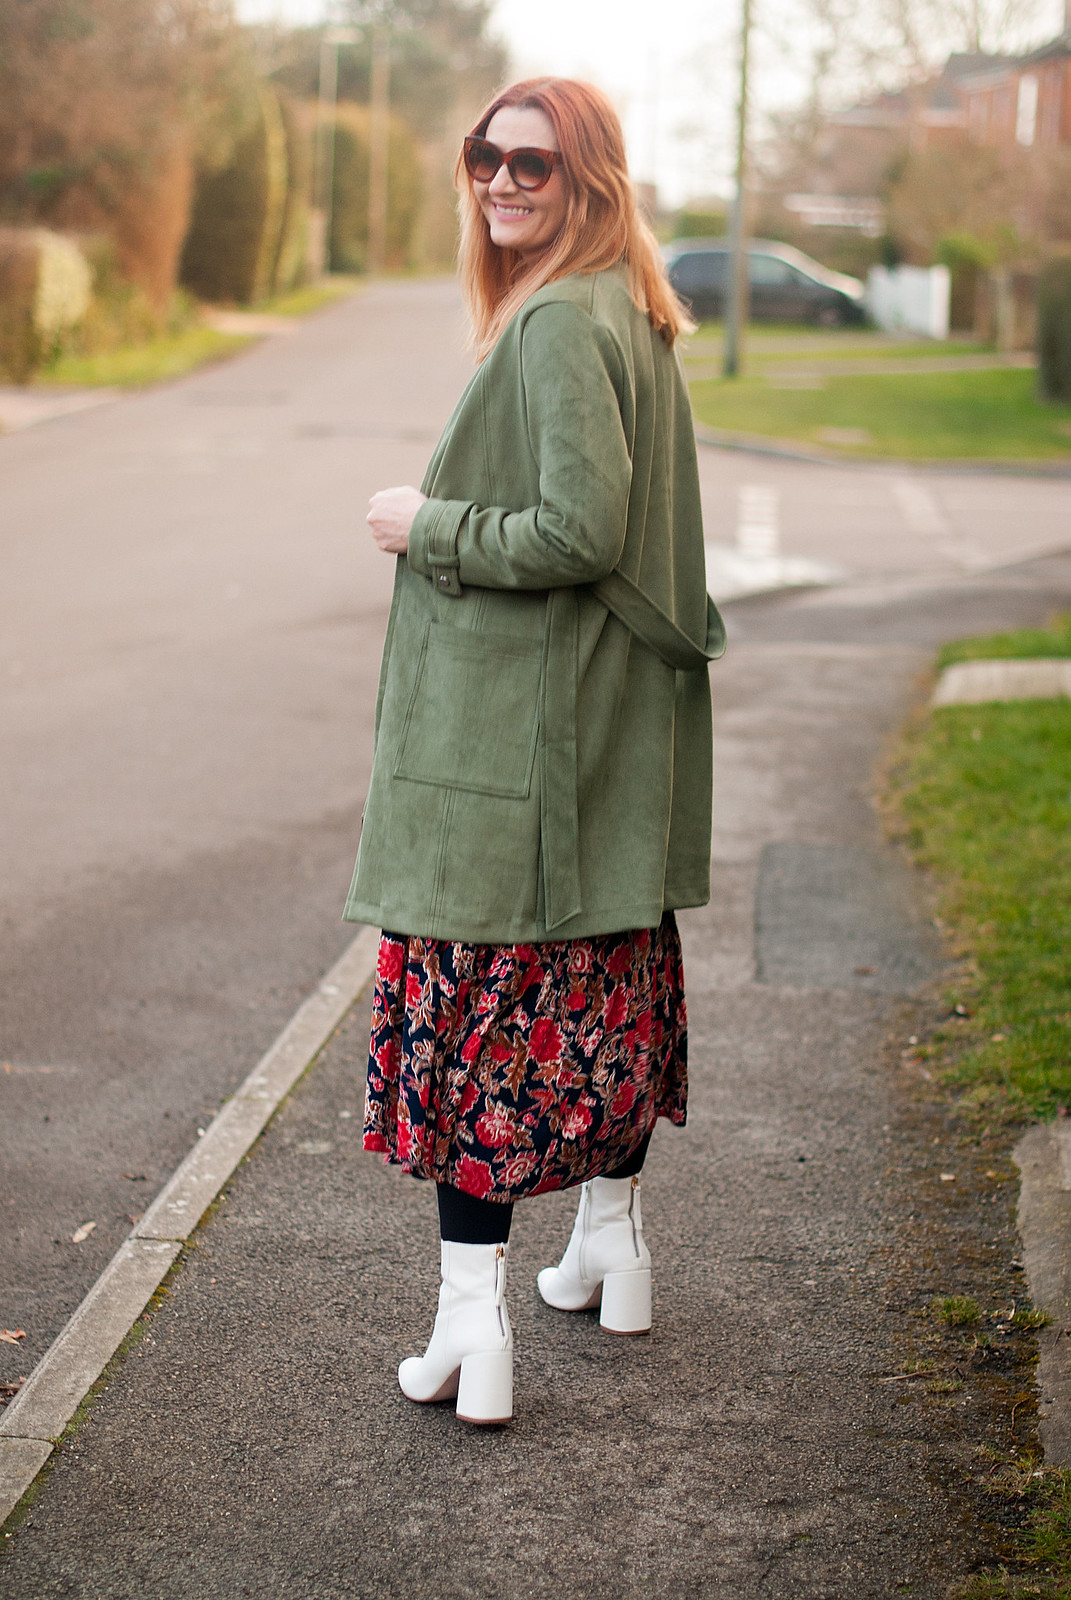 Floral maxi dress and white boots with longline khaki jacket and tan bumbag | Over 40 style fashion | Not Dressed As Lamb